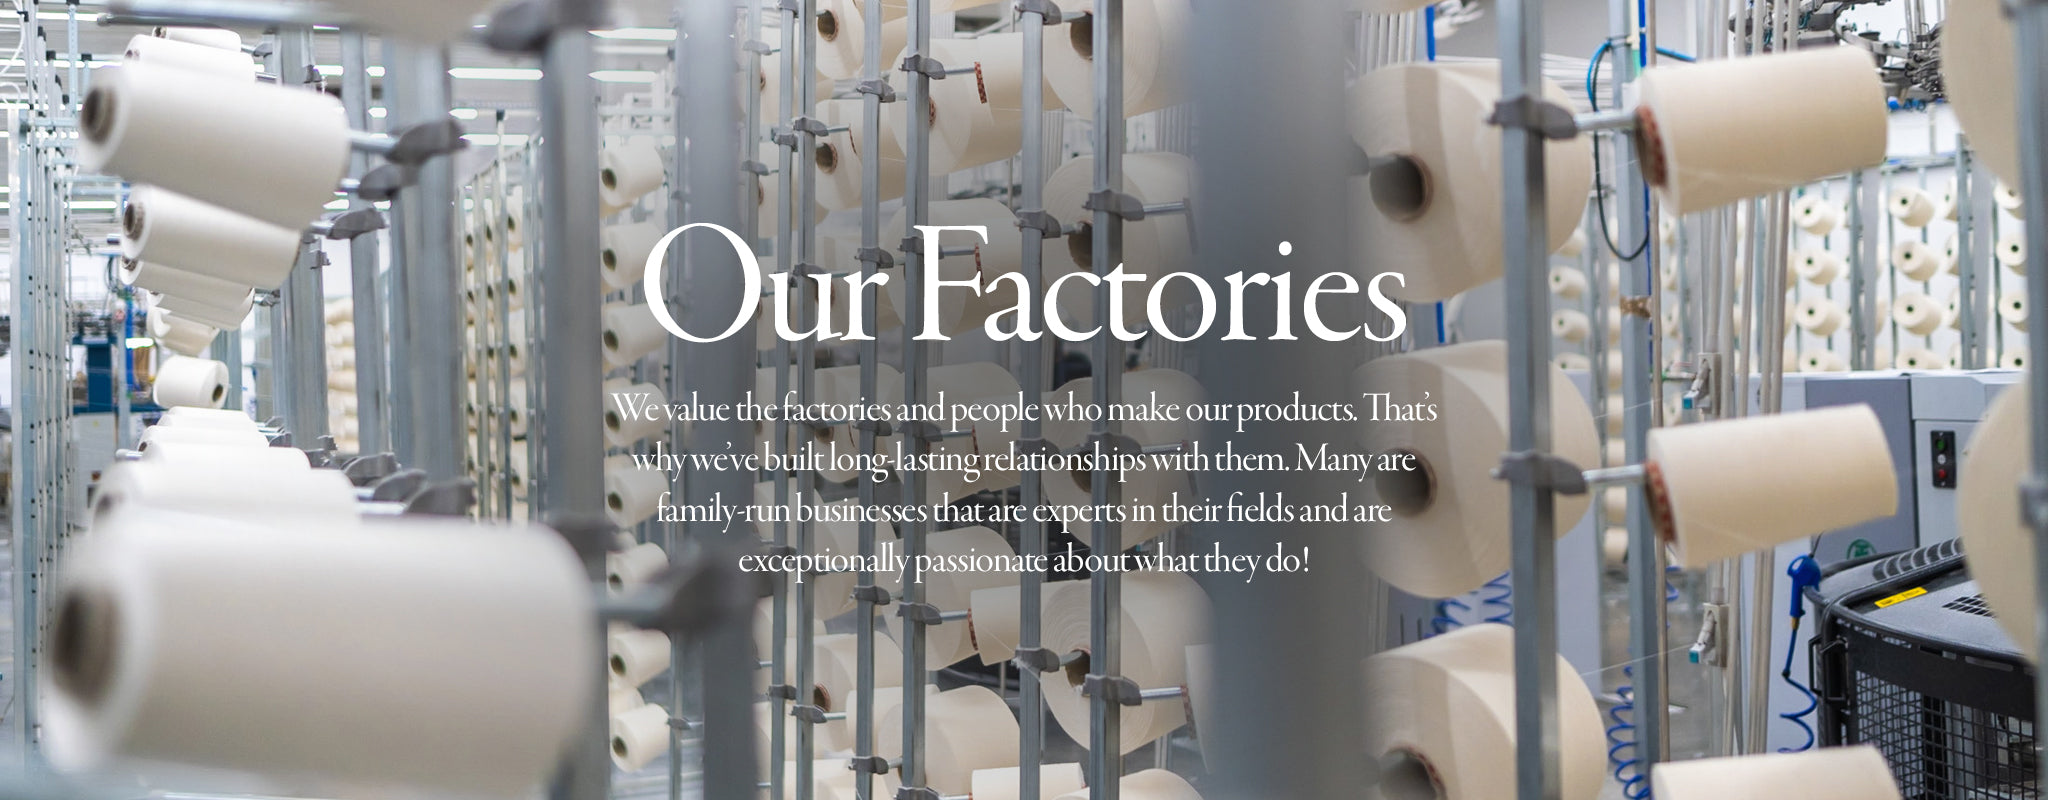 Our factories